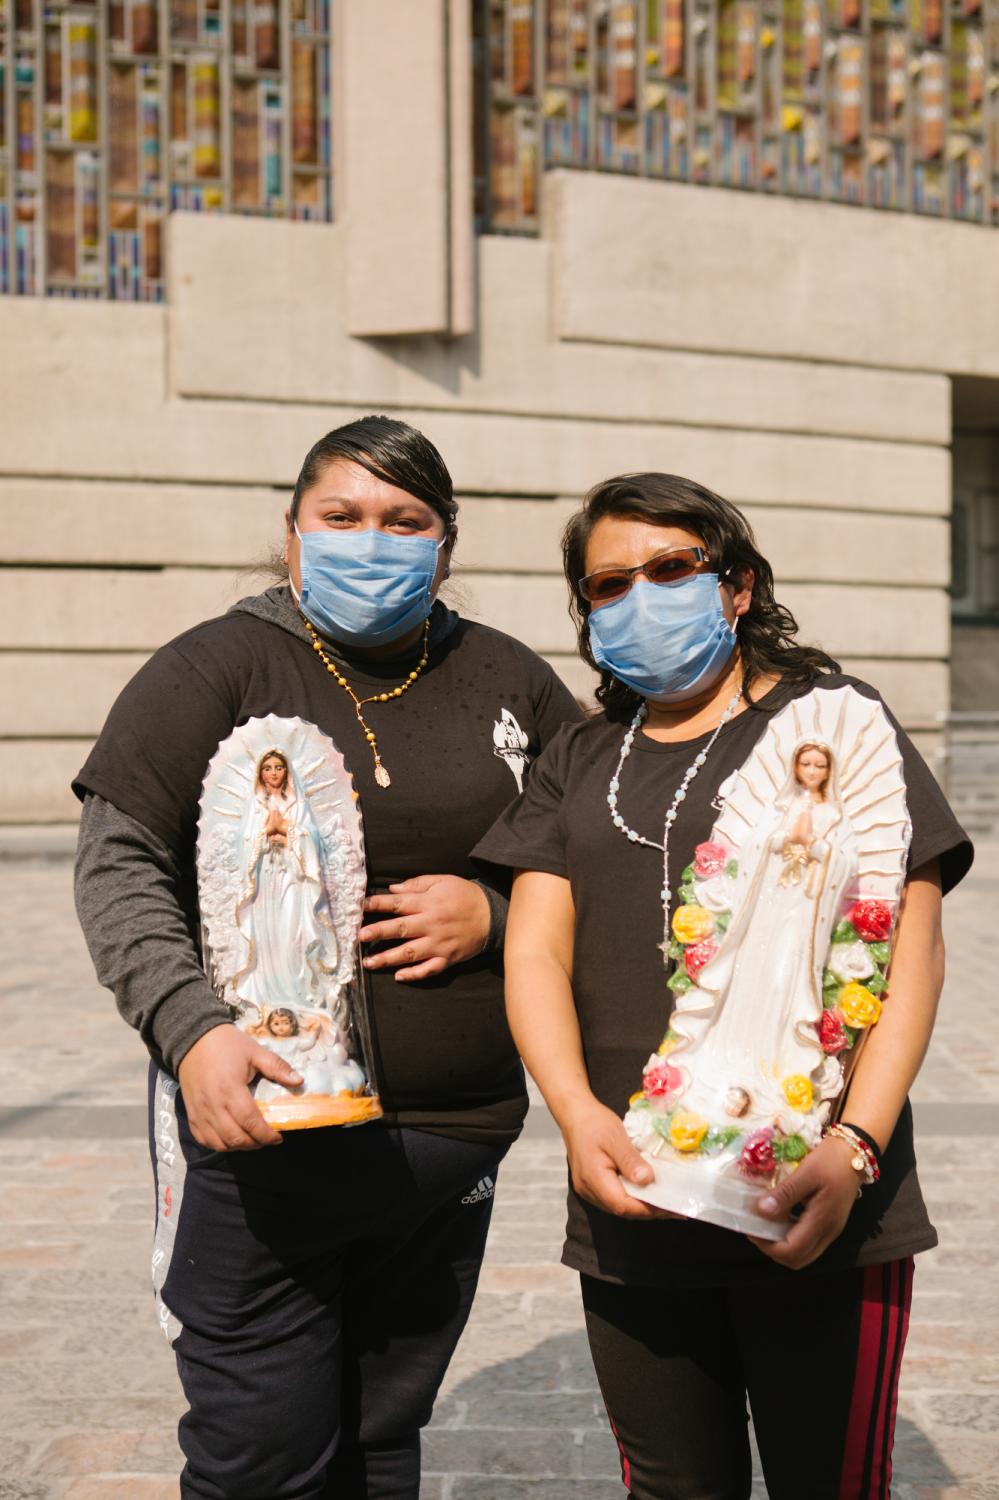 Dulce Vianney Raymundo Alvarado (left to right), 30, and Carmelita Mundia Molina, 37 rom Puebla, Mexico, pose for a portrait at the Basilica of Our Lady of Guadalupe in Mexico City, Mexico. &quot;Today I feel a little bad because we are not going to do the pilgrimage as it should be done but I thank God that he gave us the opportunity to come and at least, visit [the basilica.]&quot;, said Dulce Vianney Raymundo Alvarado. Dulce&#39;s phone number: 2 33 117 2233 Carmelita&#39;s: 2 33 103 44 60